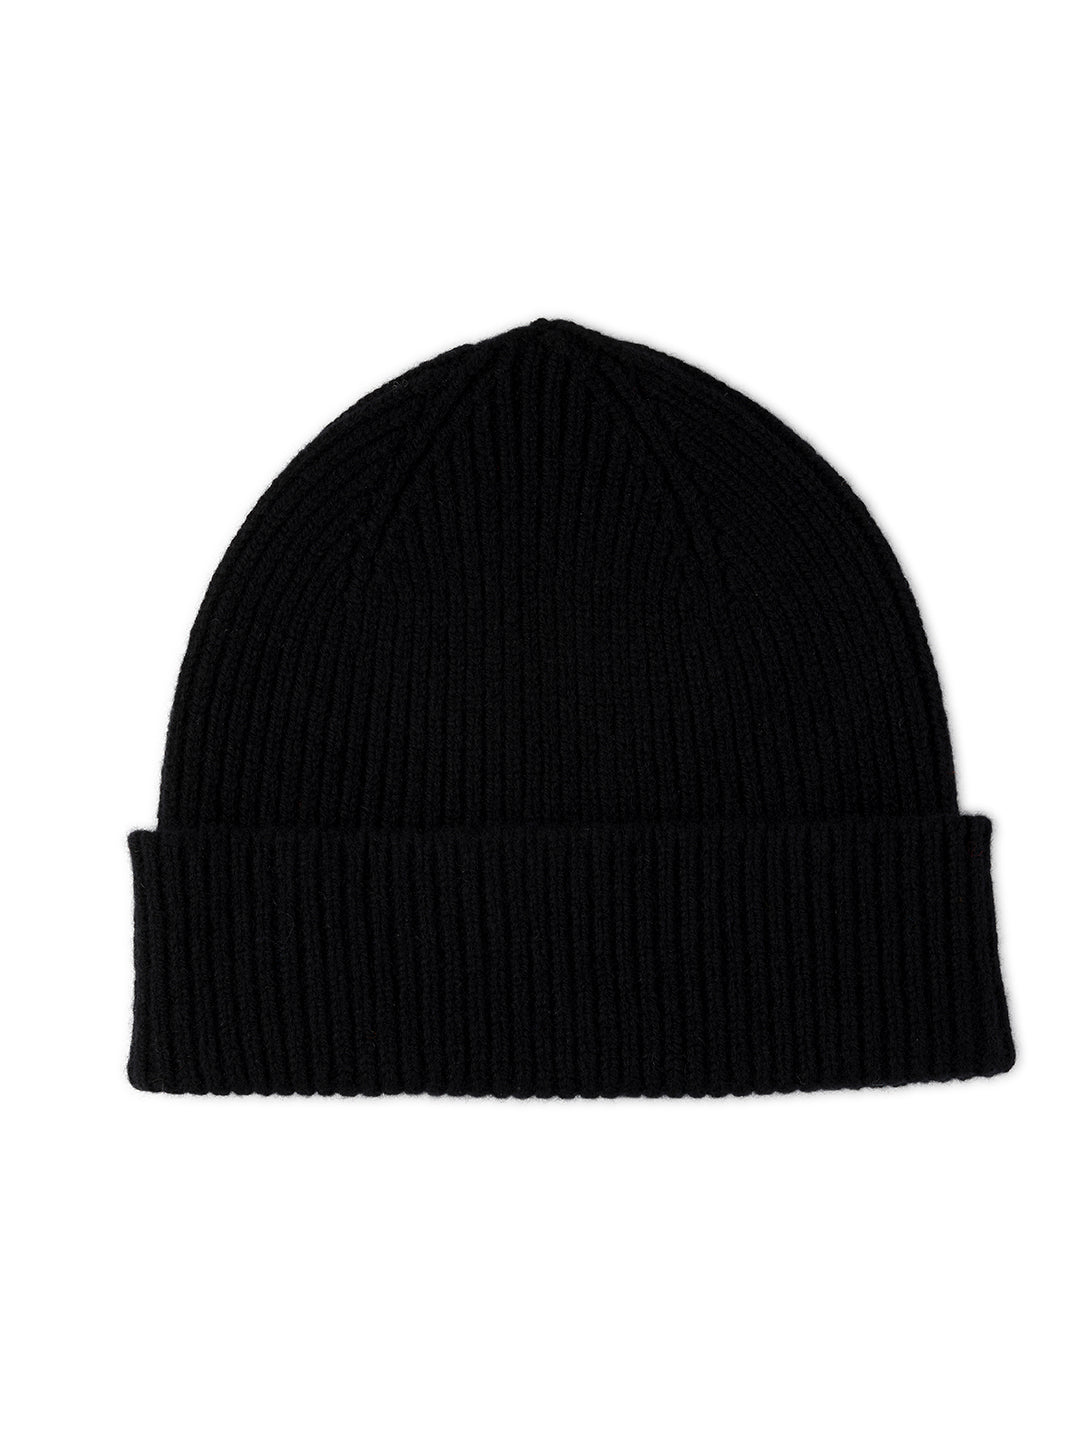 MACKIE | Clyde Lambswool Beanie - Black | Over The Rainbow – Over the ...